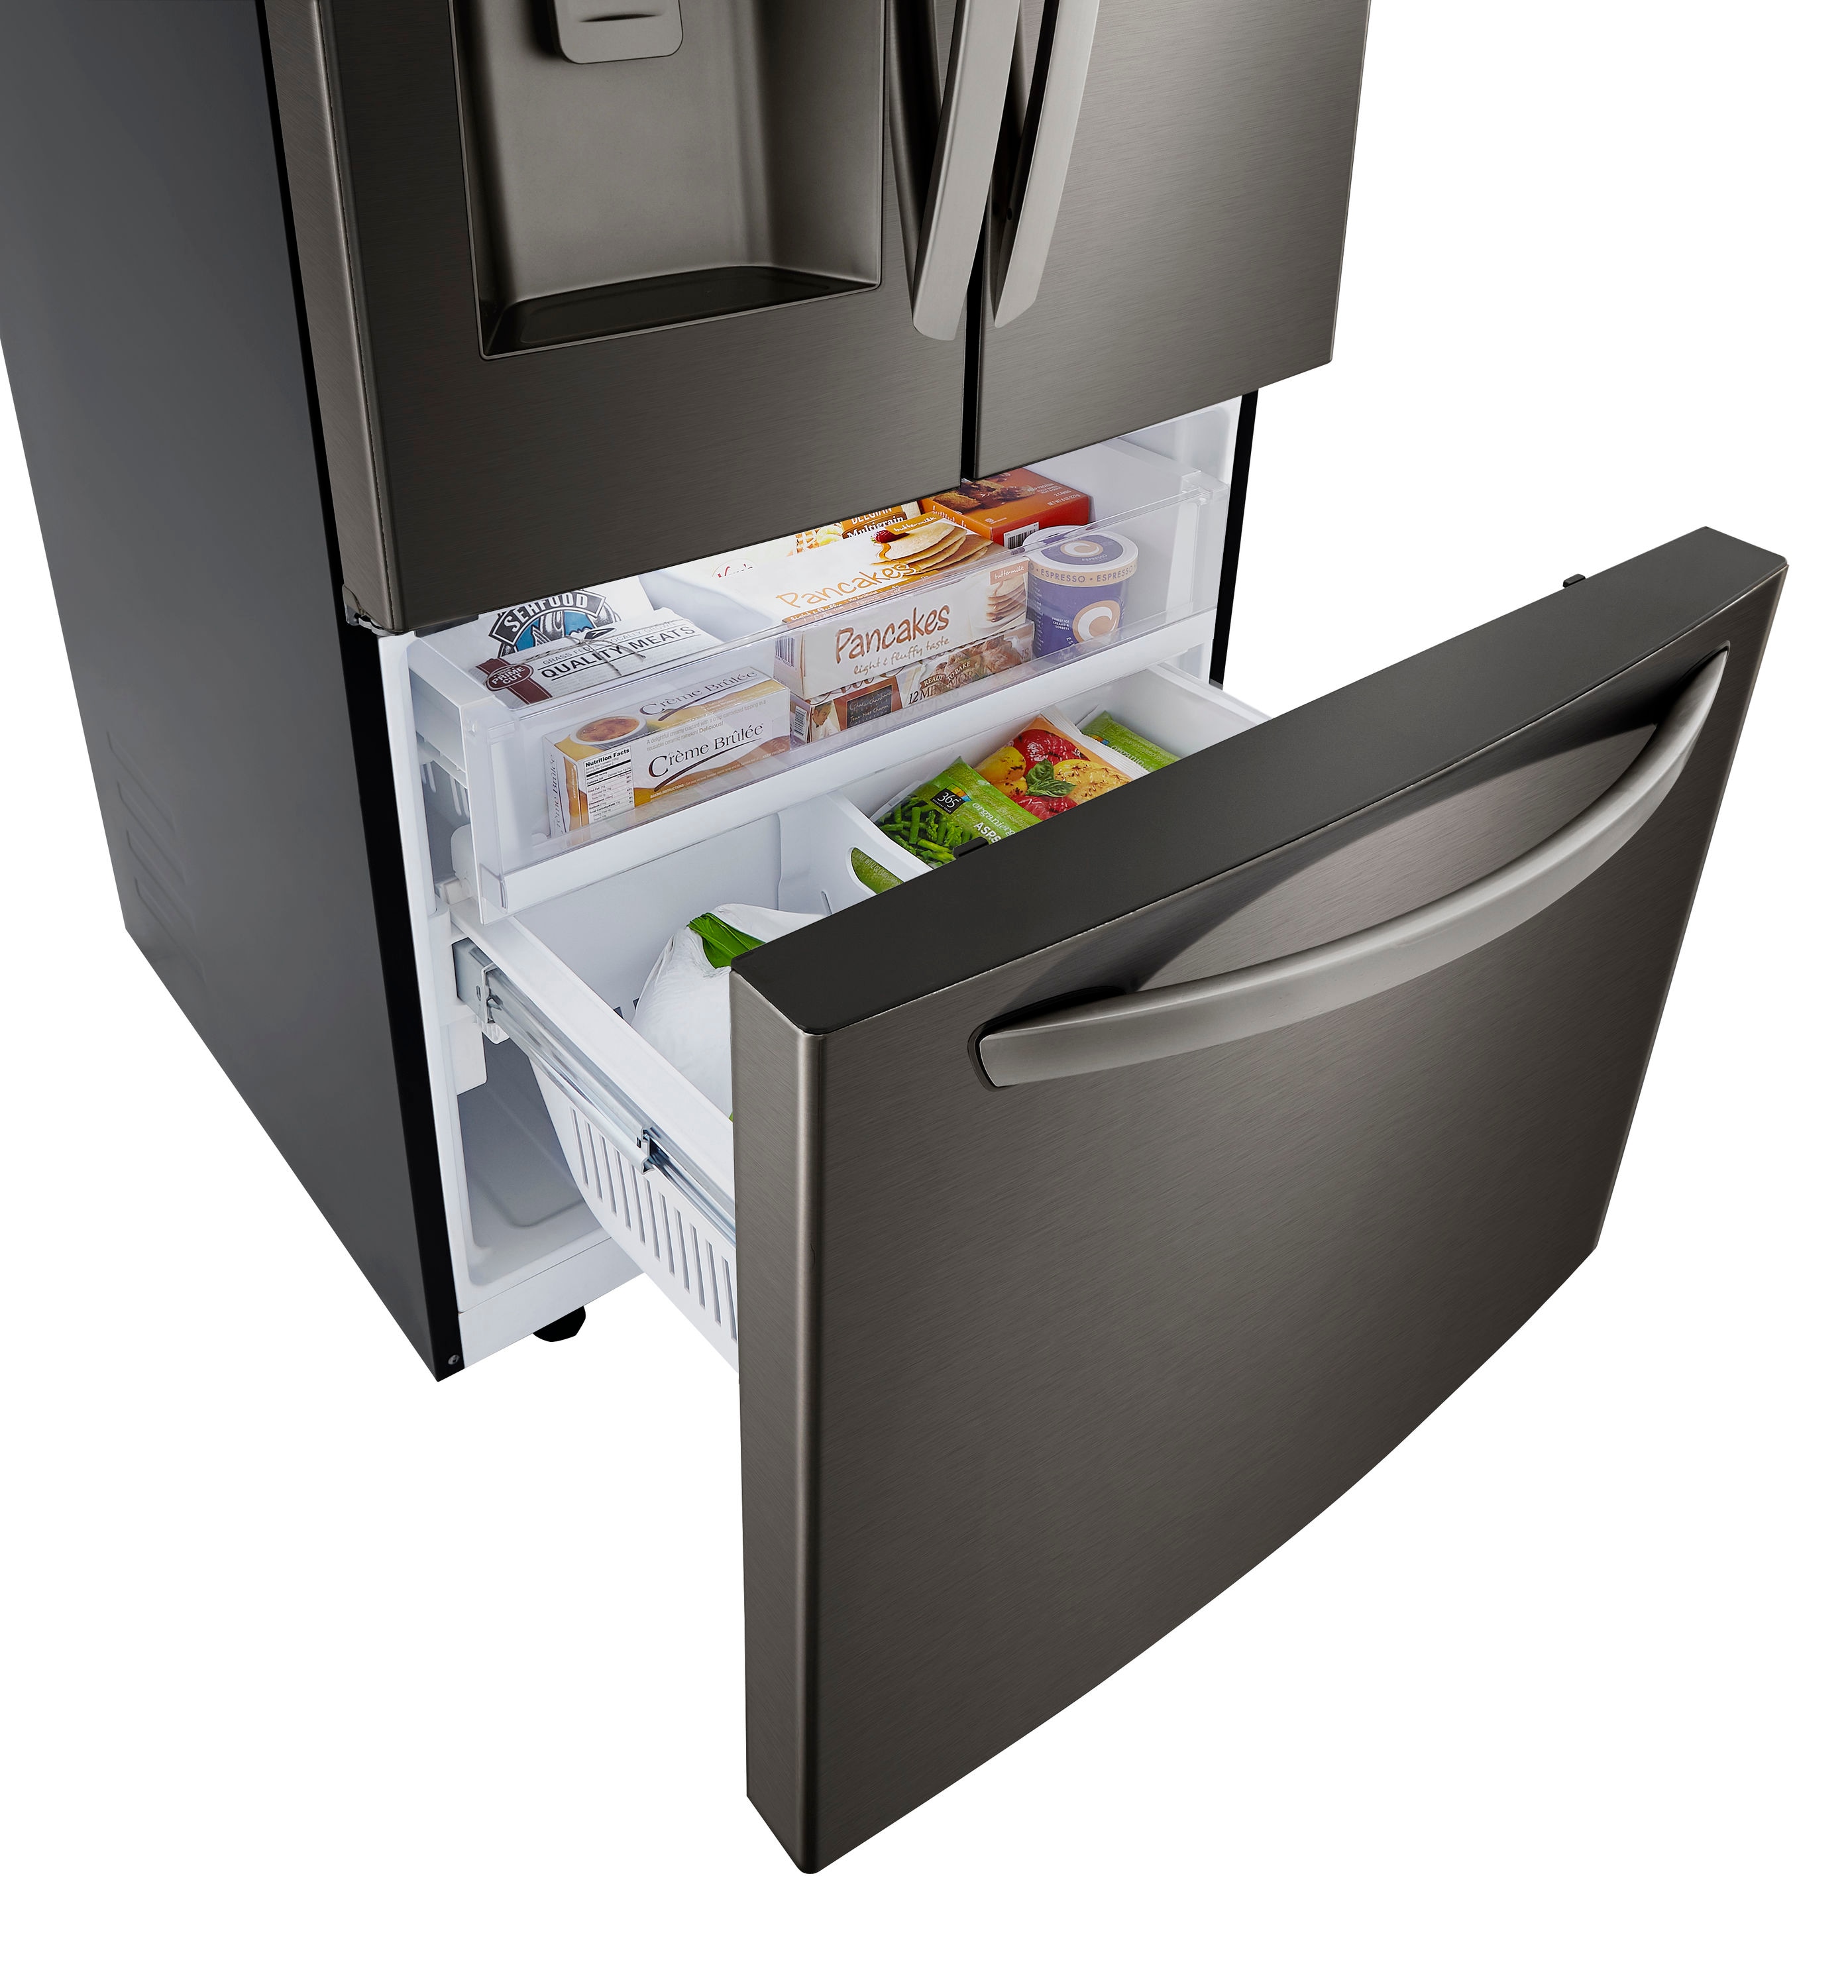 LG Electronics 23.7 cu. ft. French Door Refrigerator in Stainless